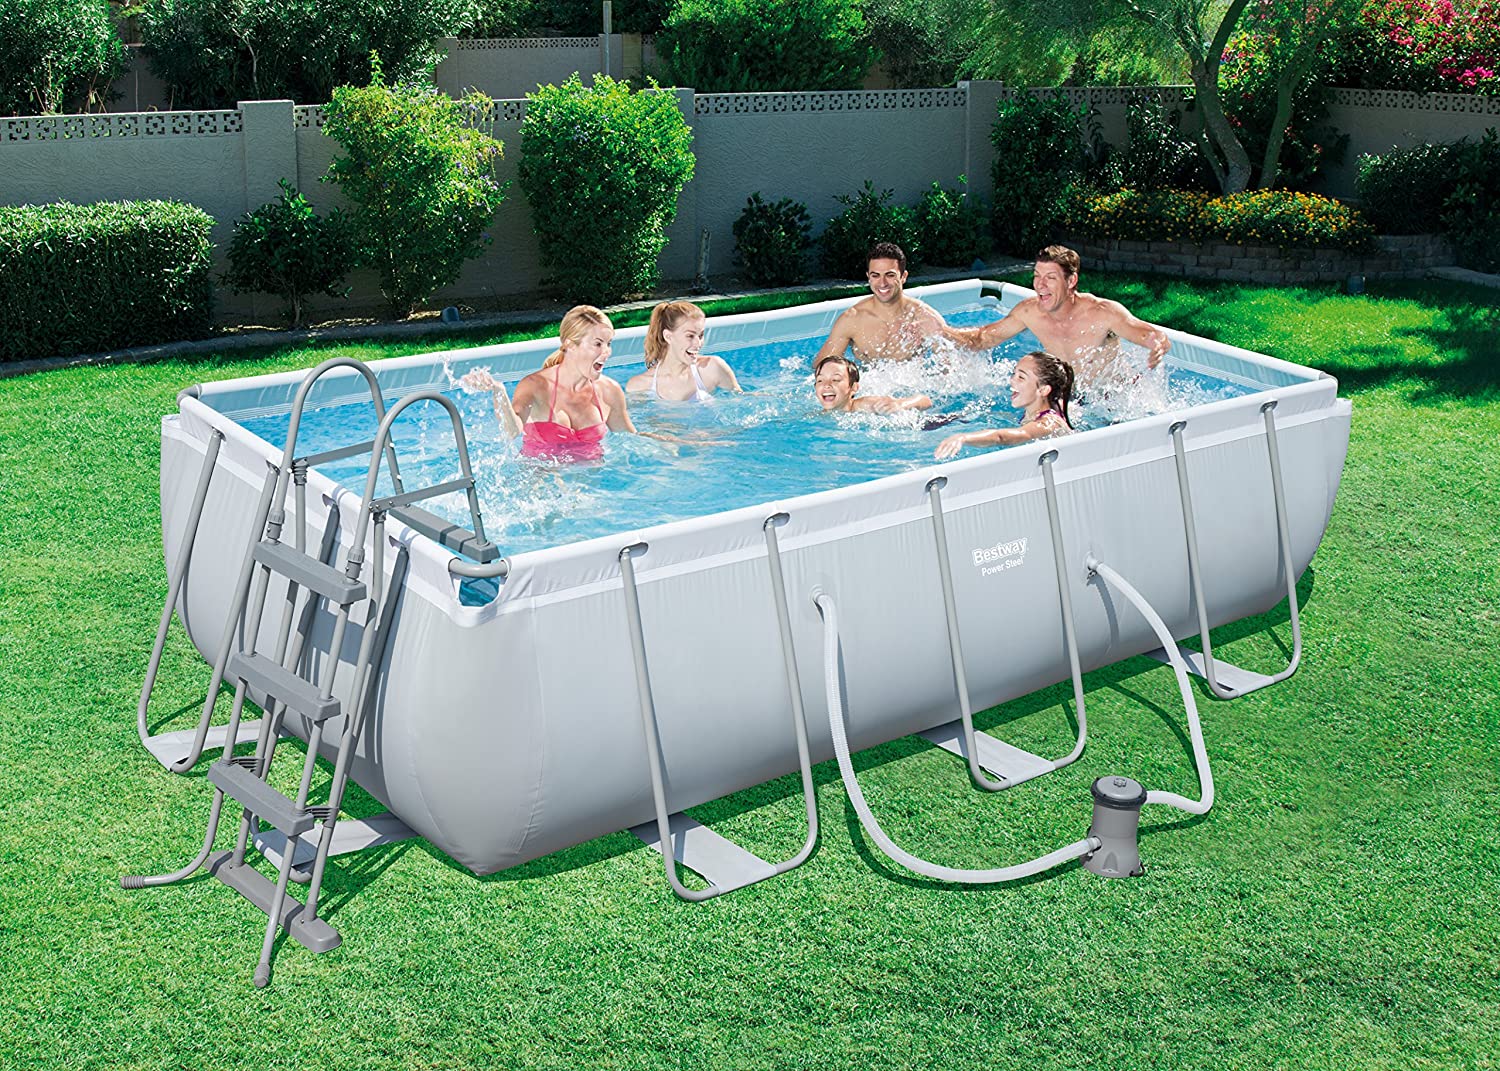 Creatice Rectangular Above Ground Swimming Pools For Sale for Simple Design